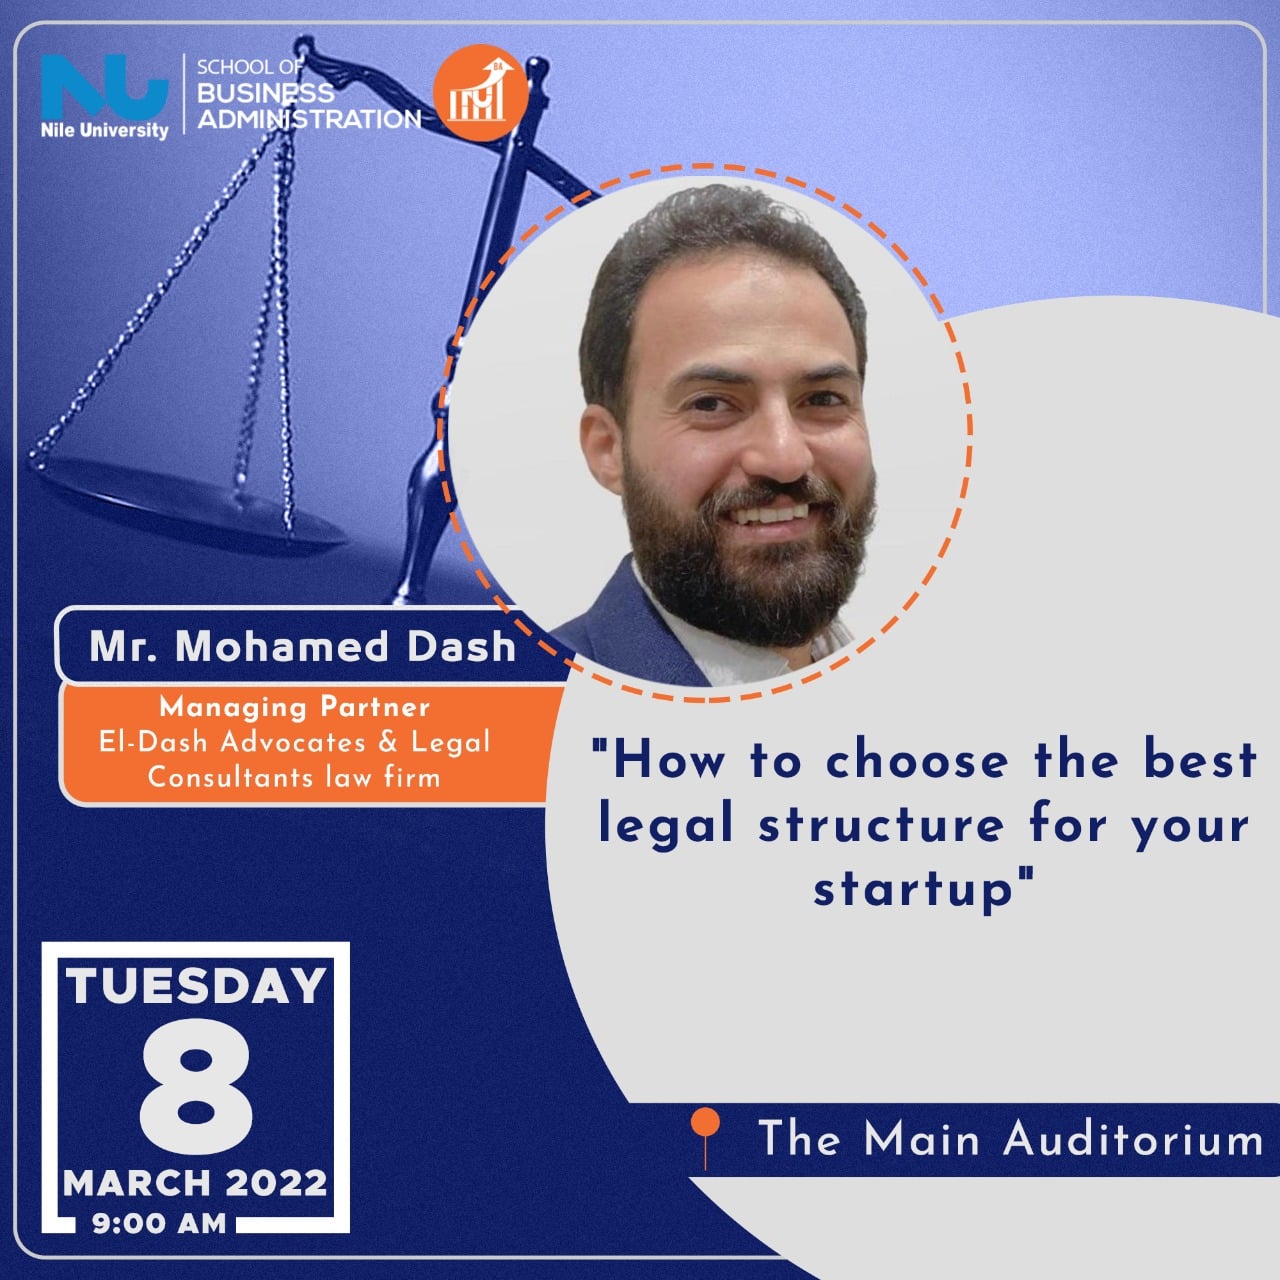 Business Administration School Talk with Mr. Mohamed Dash